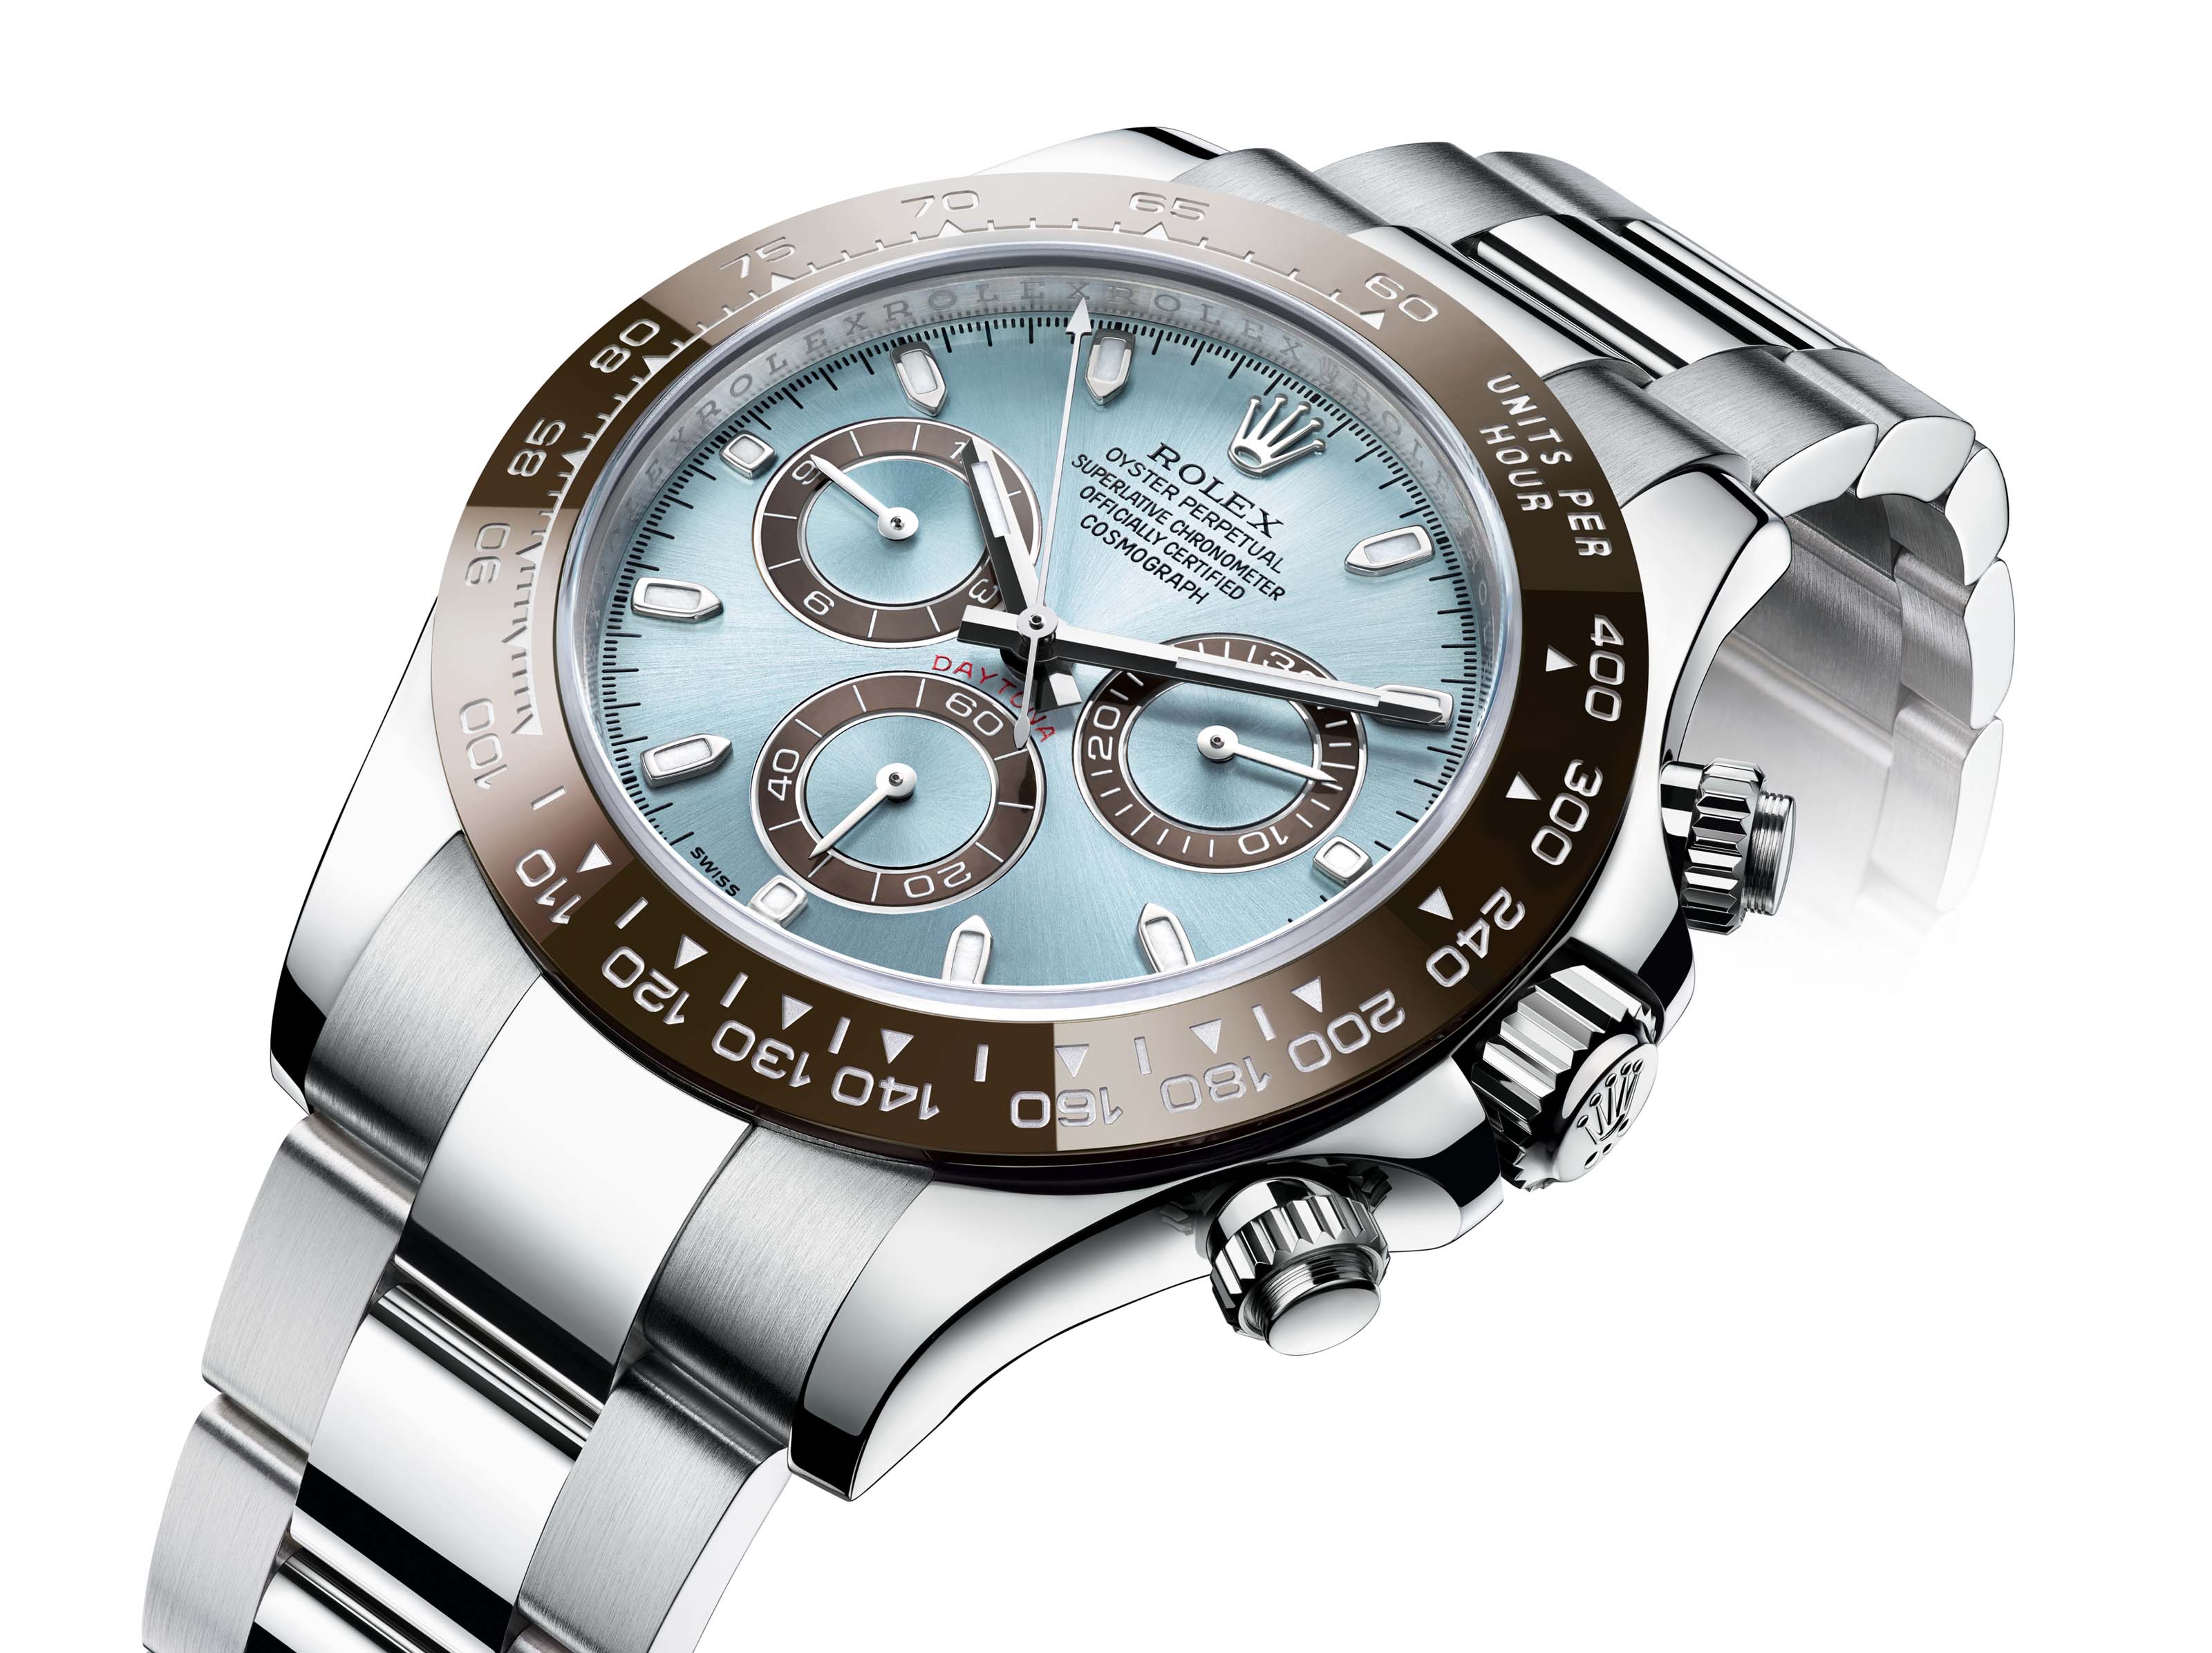 The Rolex Oyster Perpetual Cosmograph 